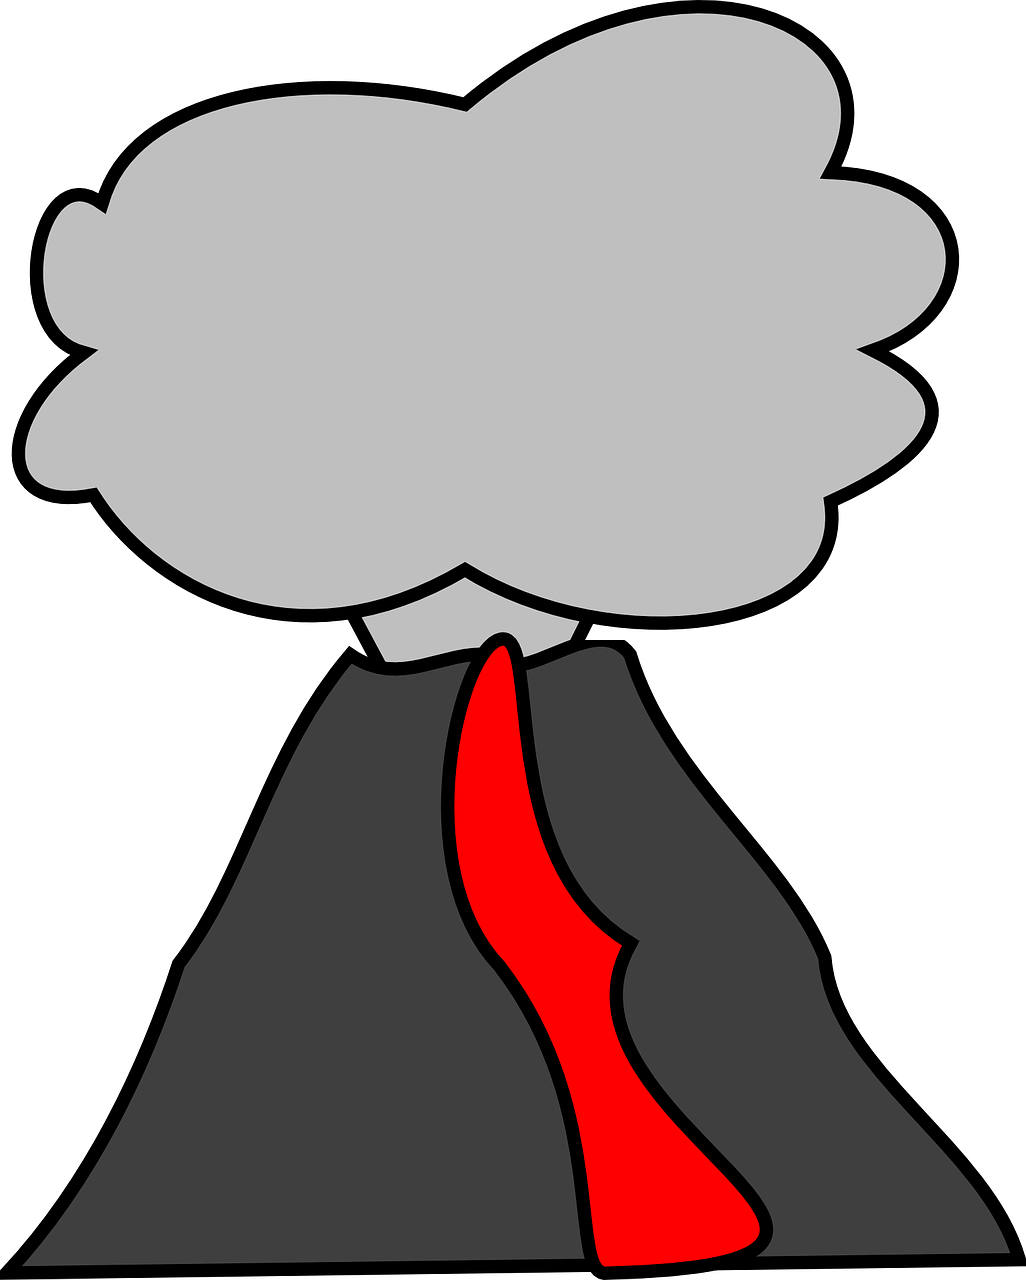 How to make a. Explosion clipart volcano